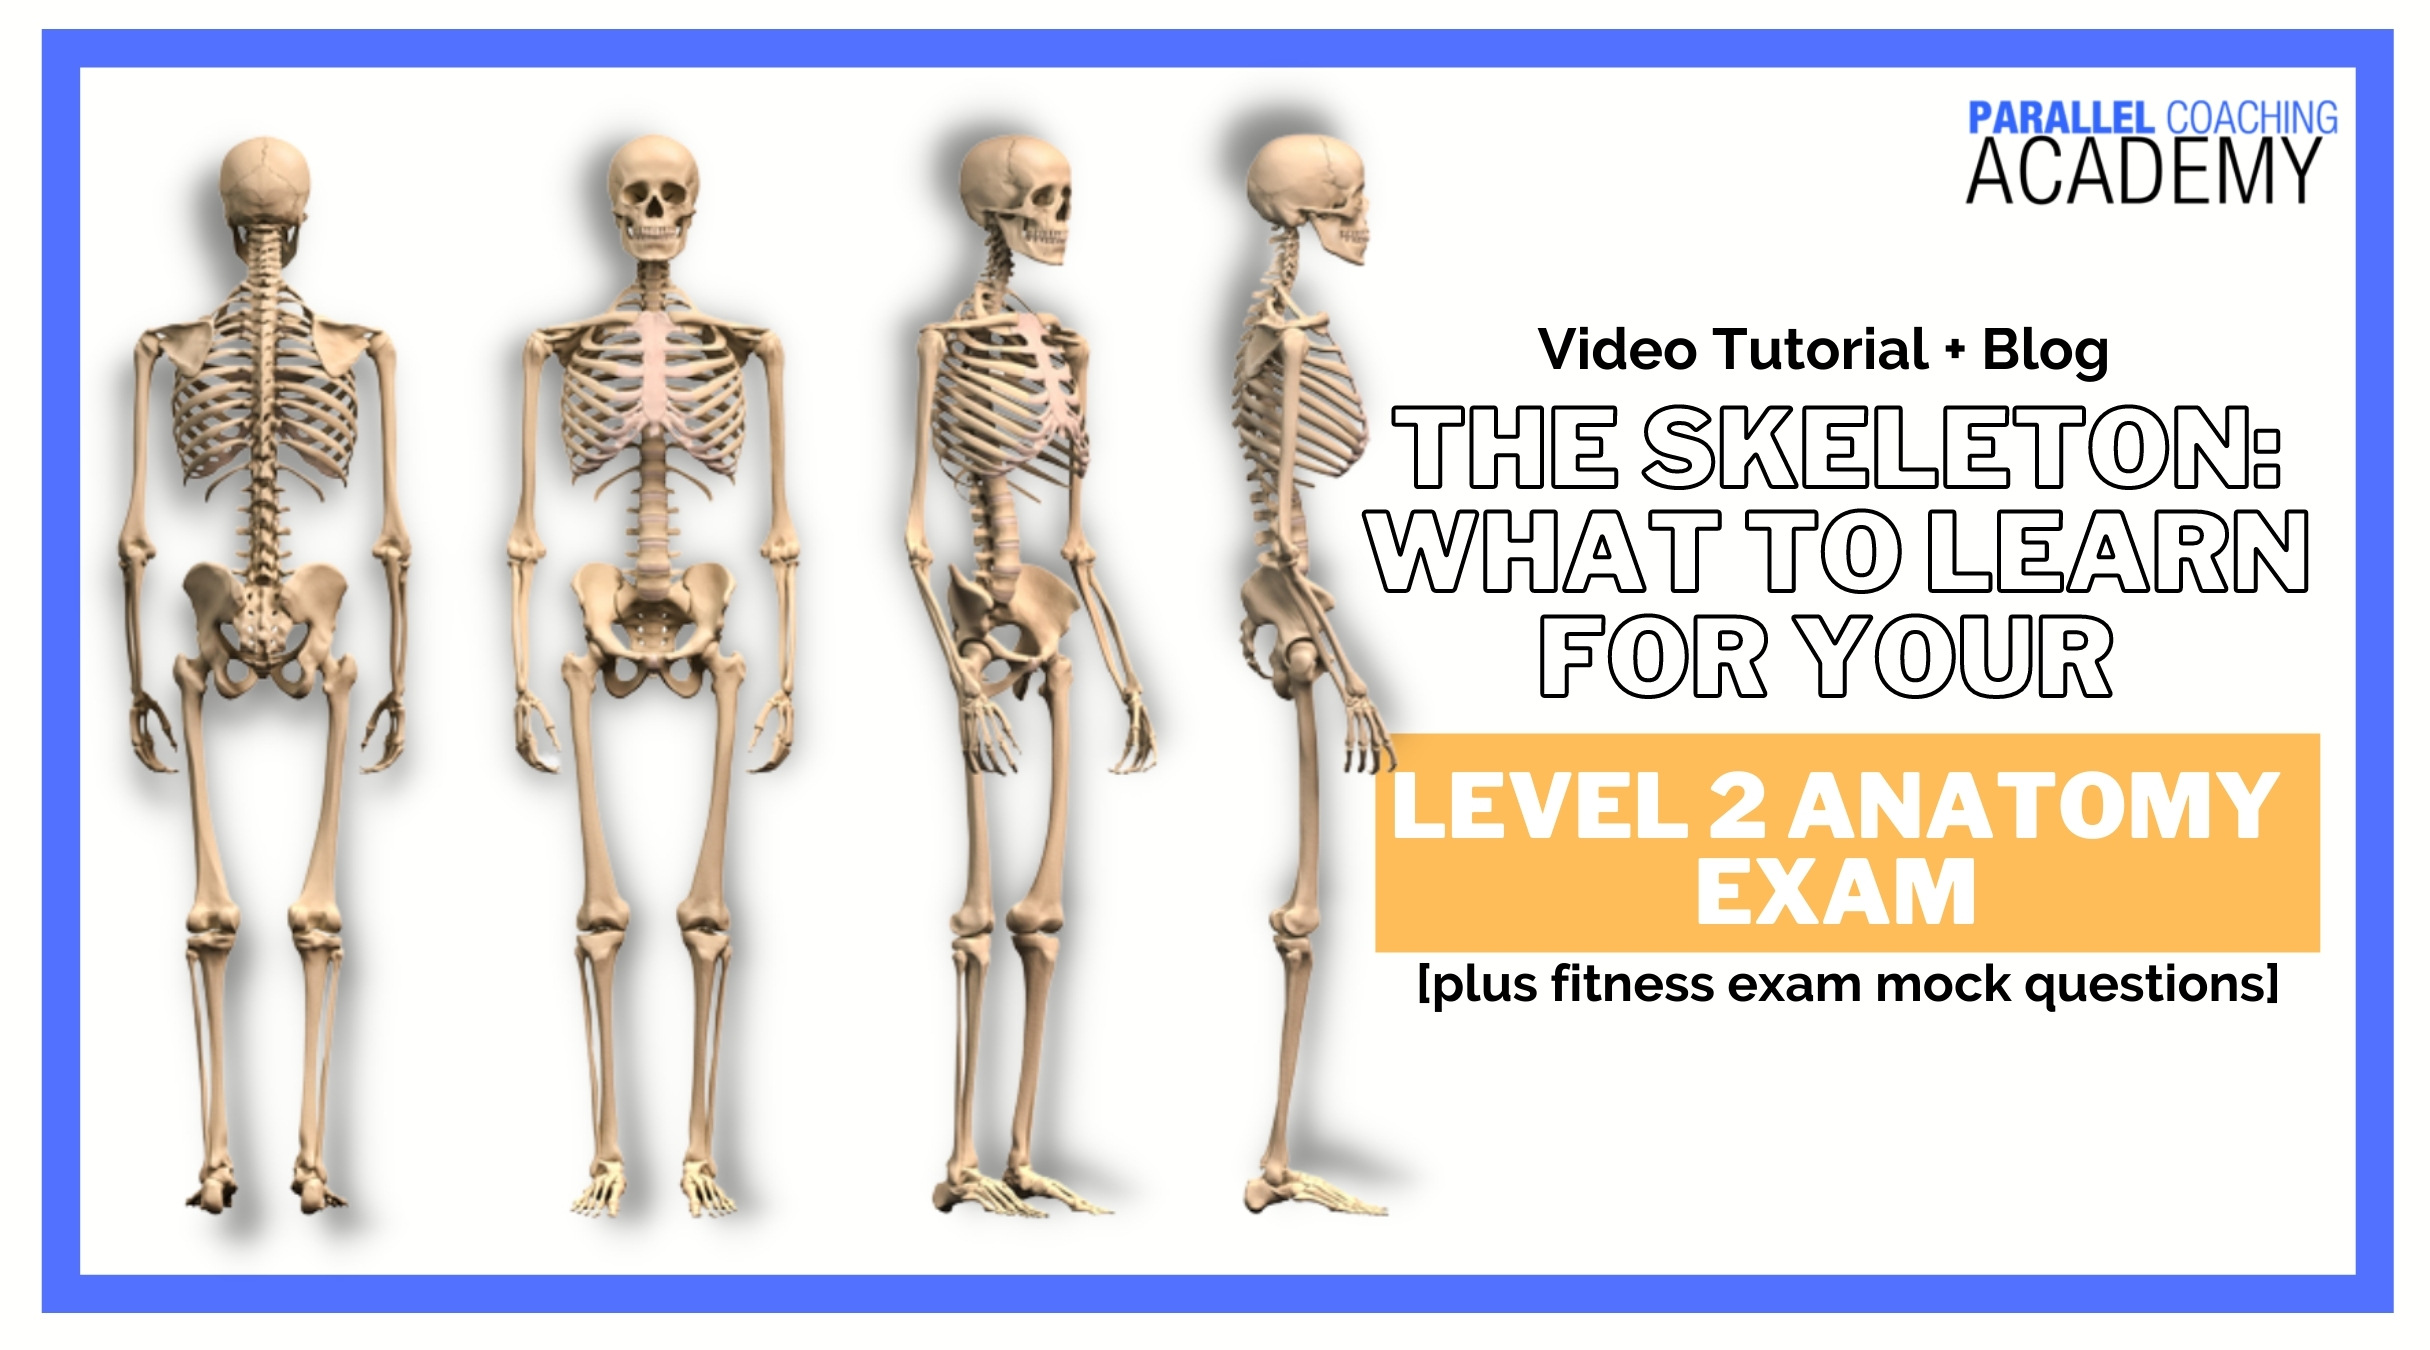 https://parallelcoaching.co.uk/wp-content/uploads/2022/04/The-Skeleton-%E2%80%93-What-To-Learn-For-Your-Level-2-Anatomy-Exam.jpg